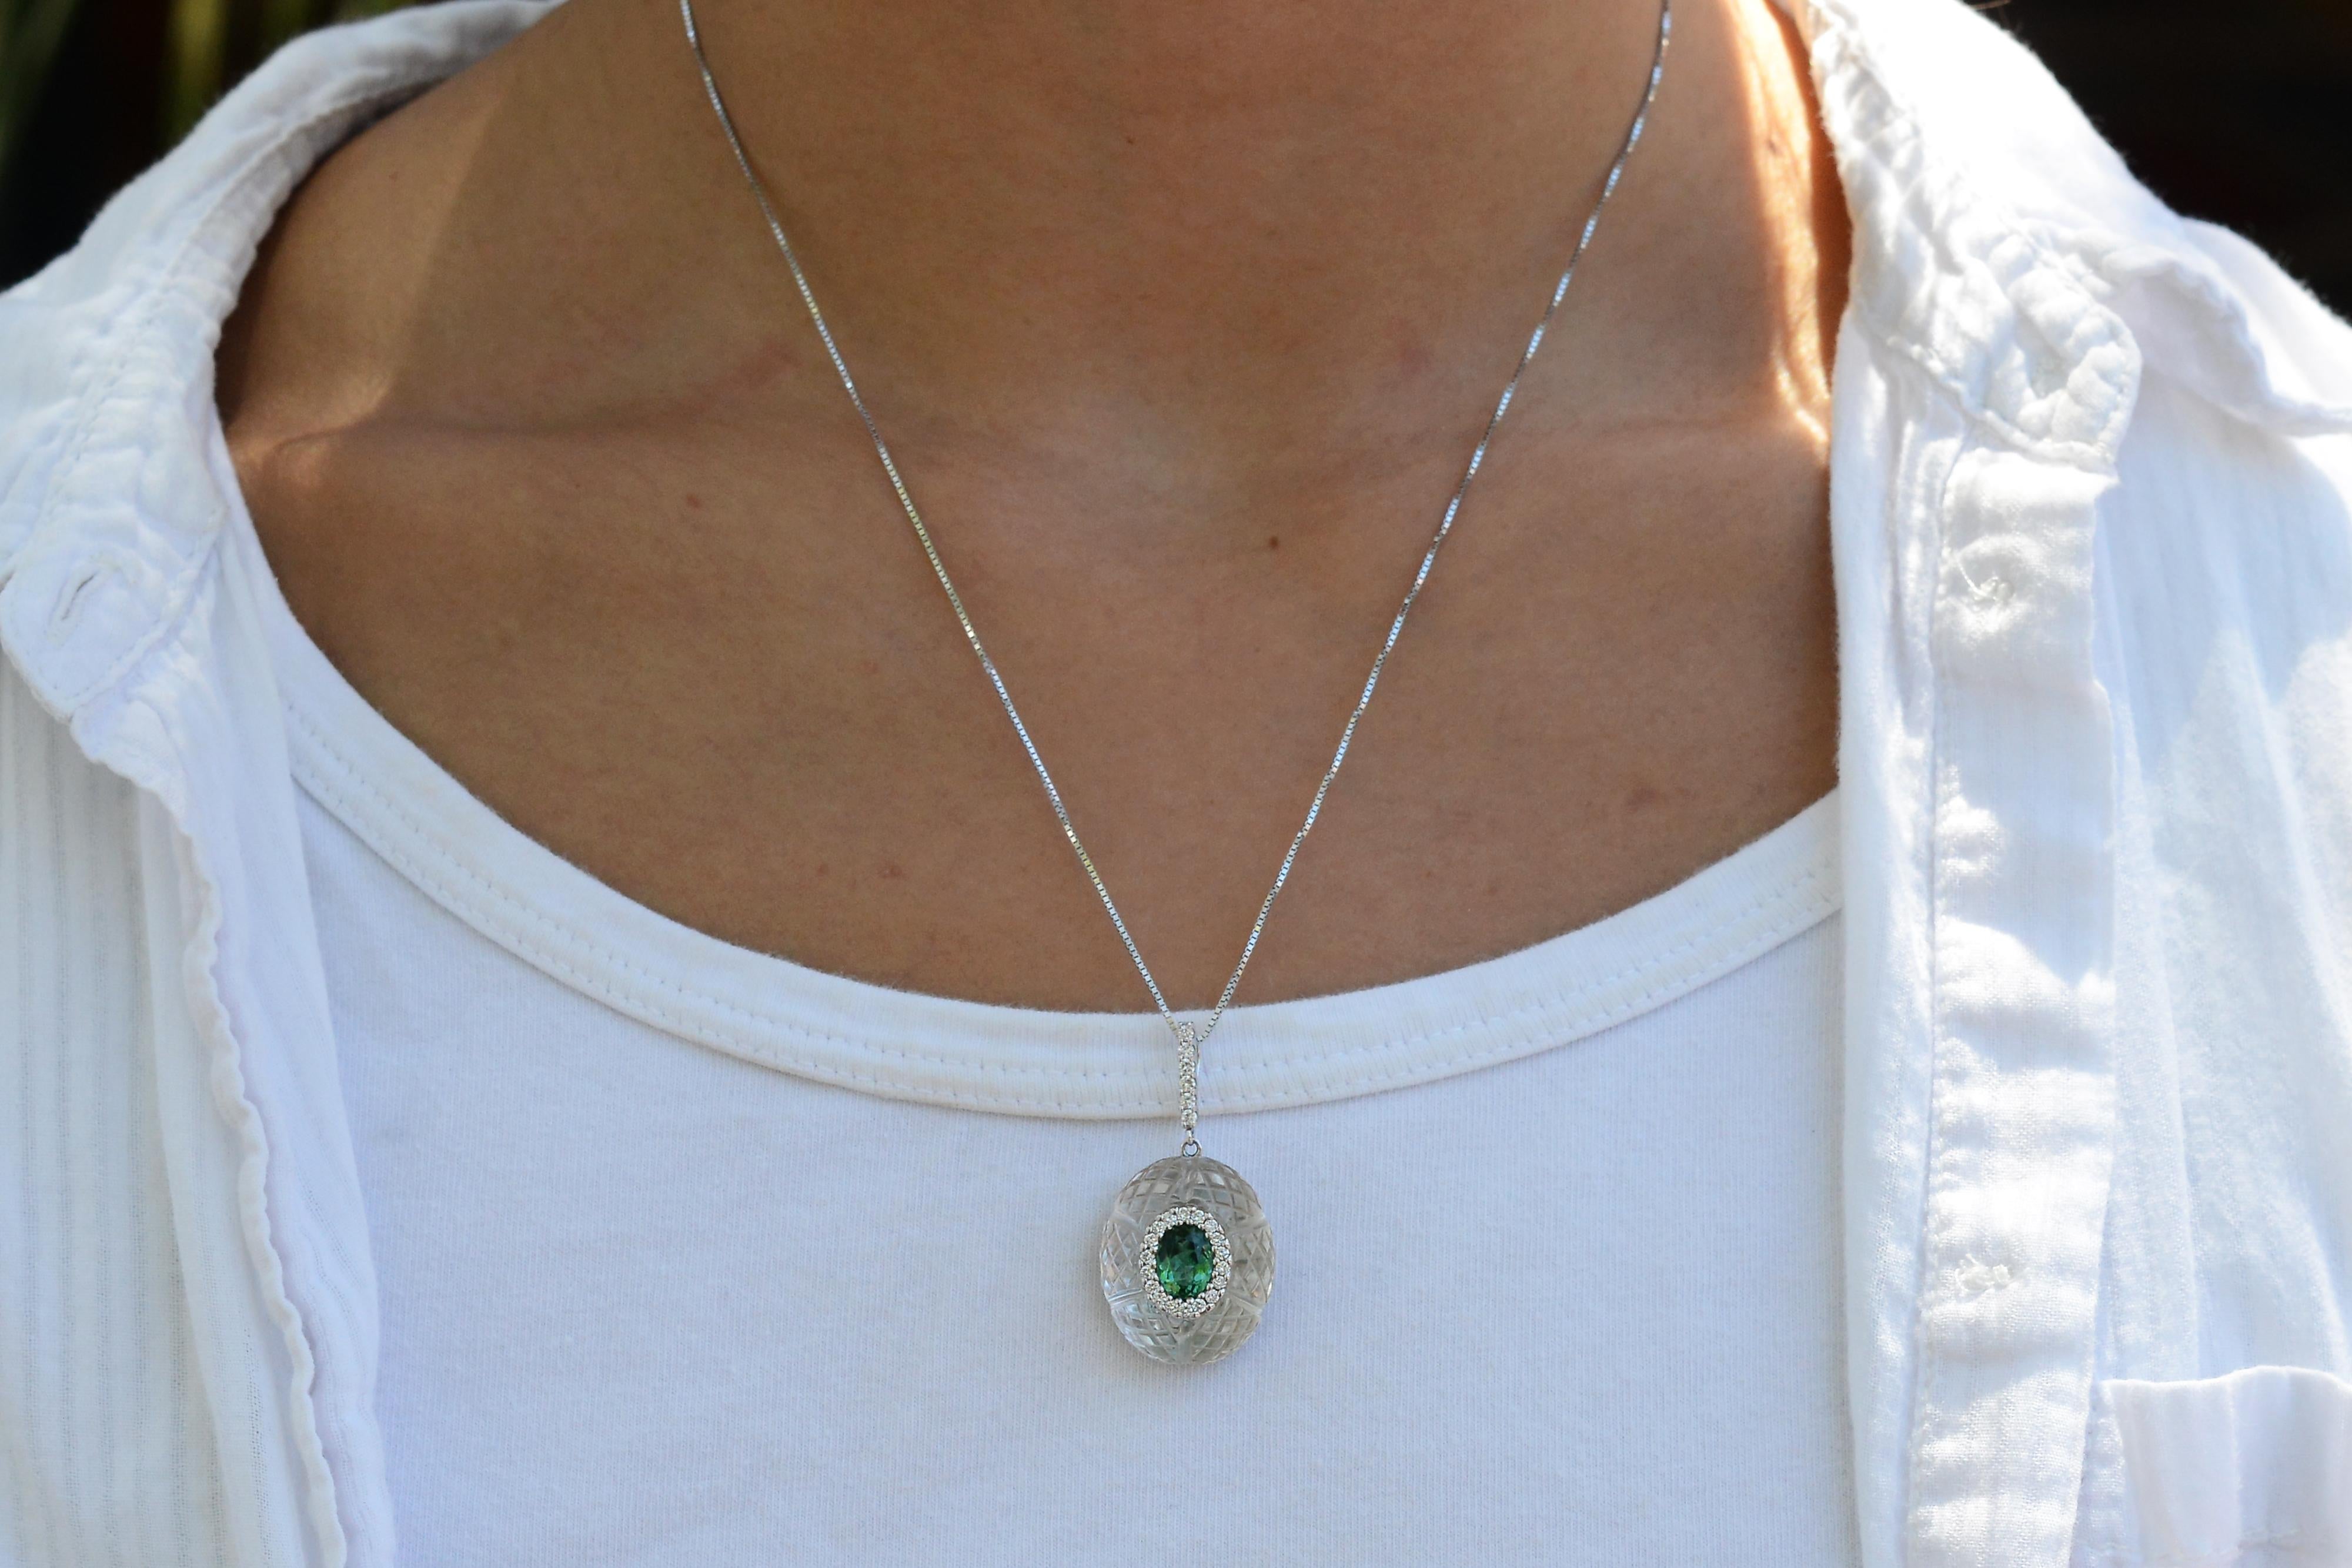 A deluxe pendant offering a captivating blend of classic elegance and modern appeal, reminiscent of the Art Deco era. Crafted with a unique carved rock crystal quartz orb and an electric blue green glowing tourmaline, it is an exquisite and